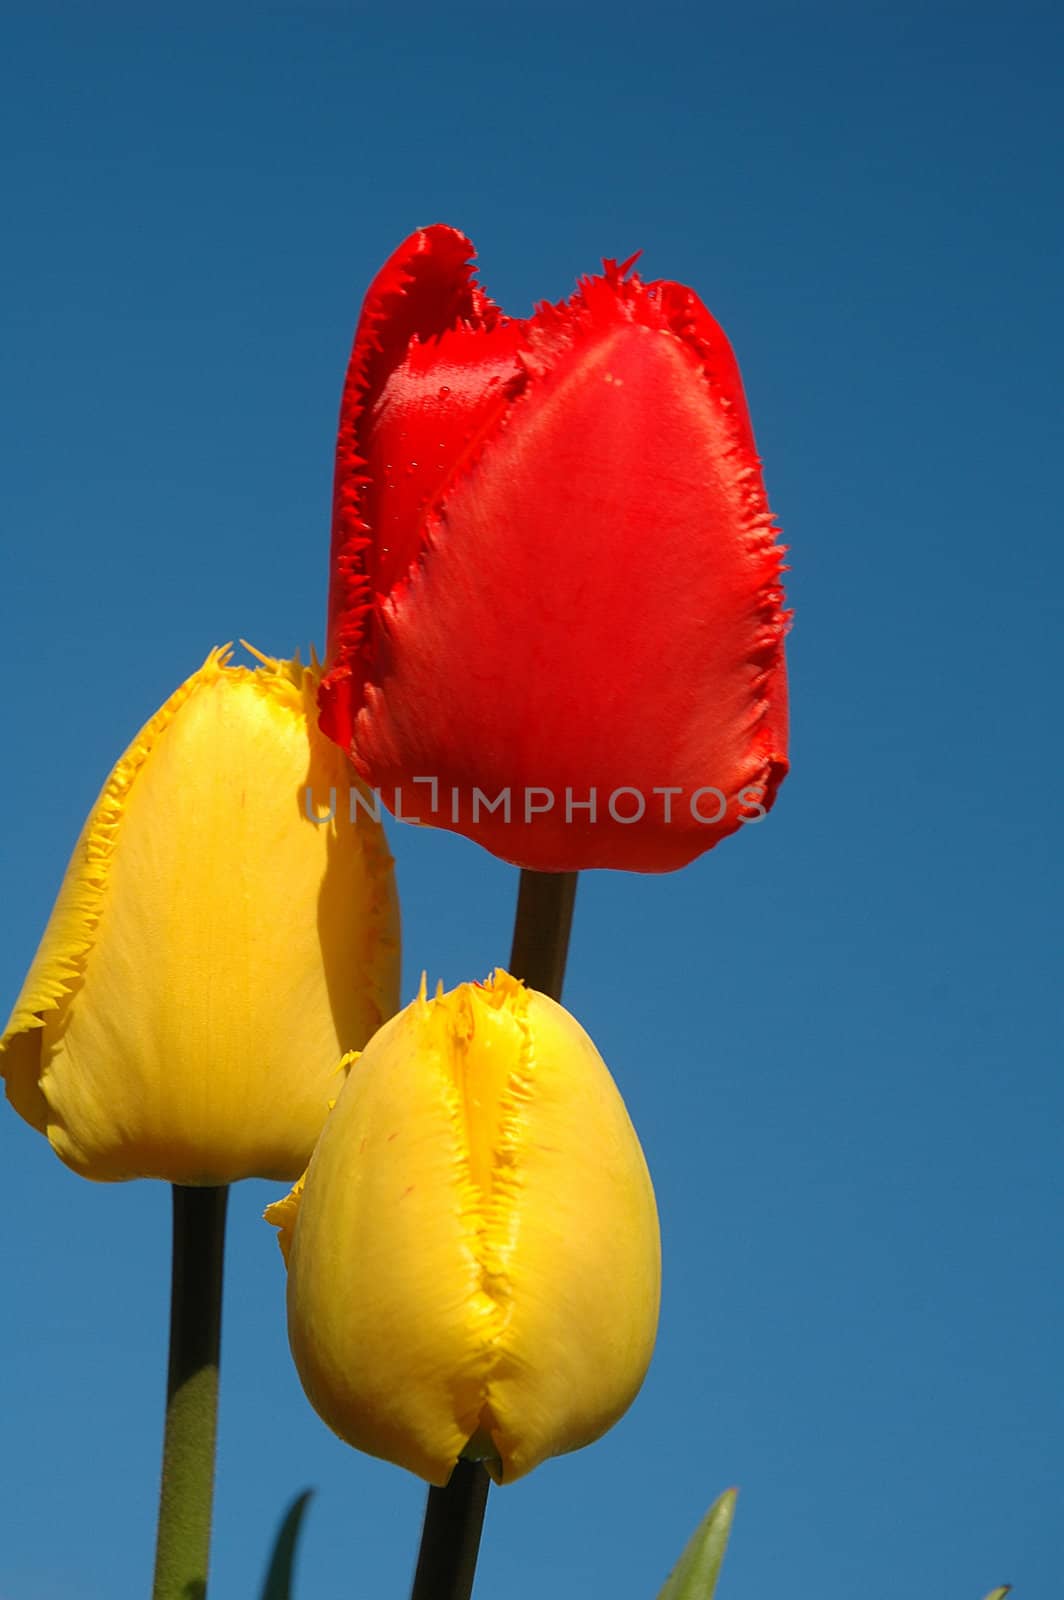 The red and yellow tulips. by OlgaDrozd